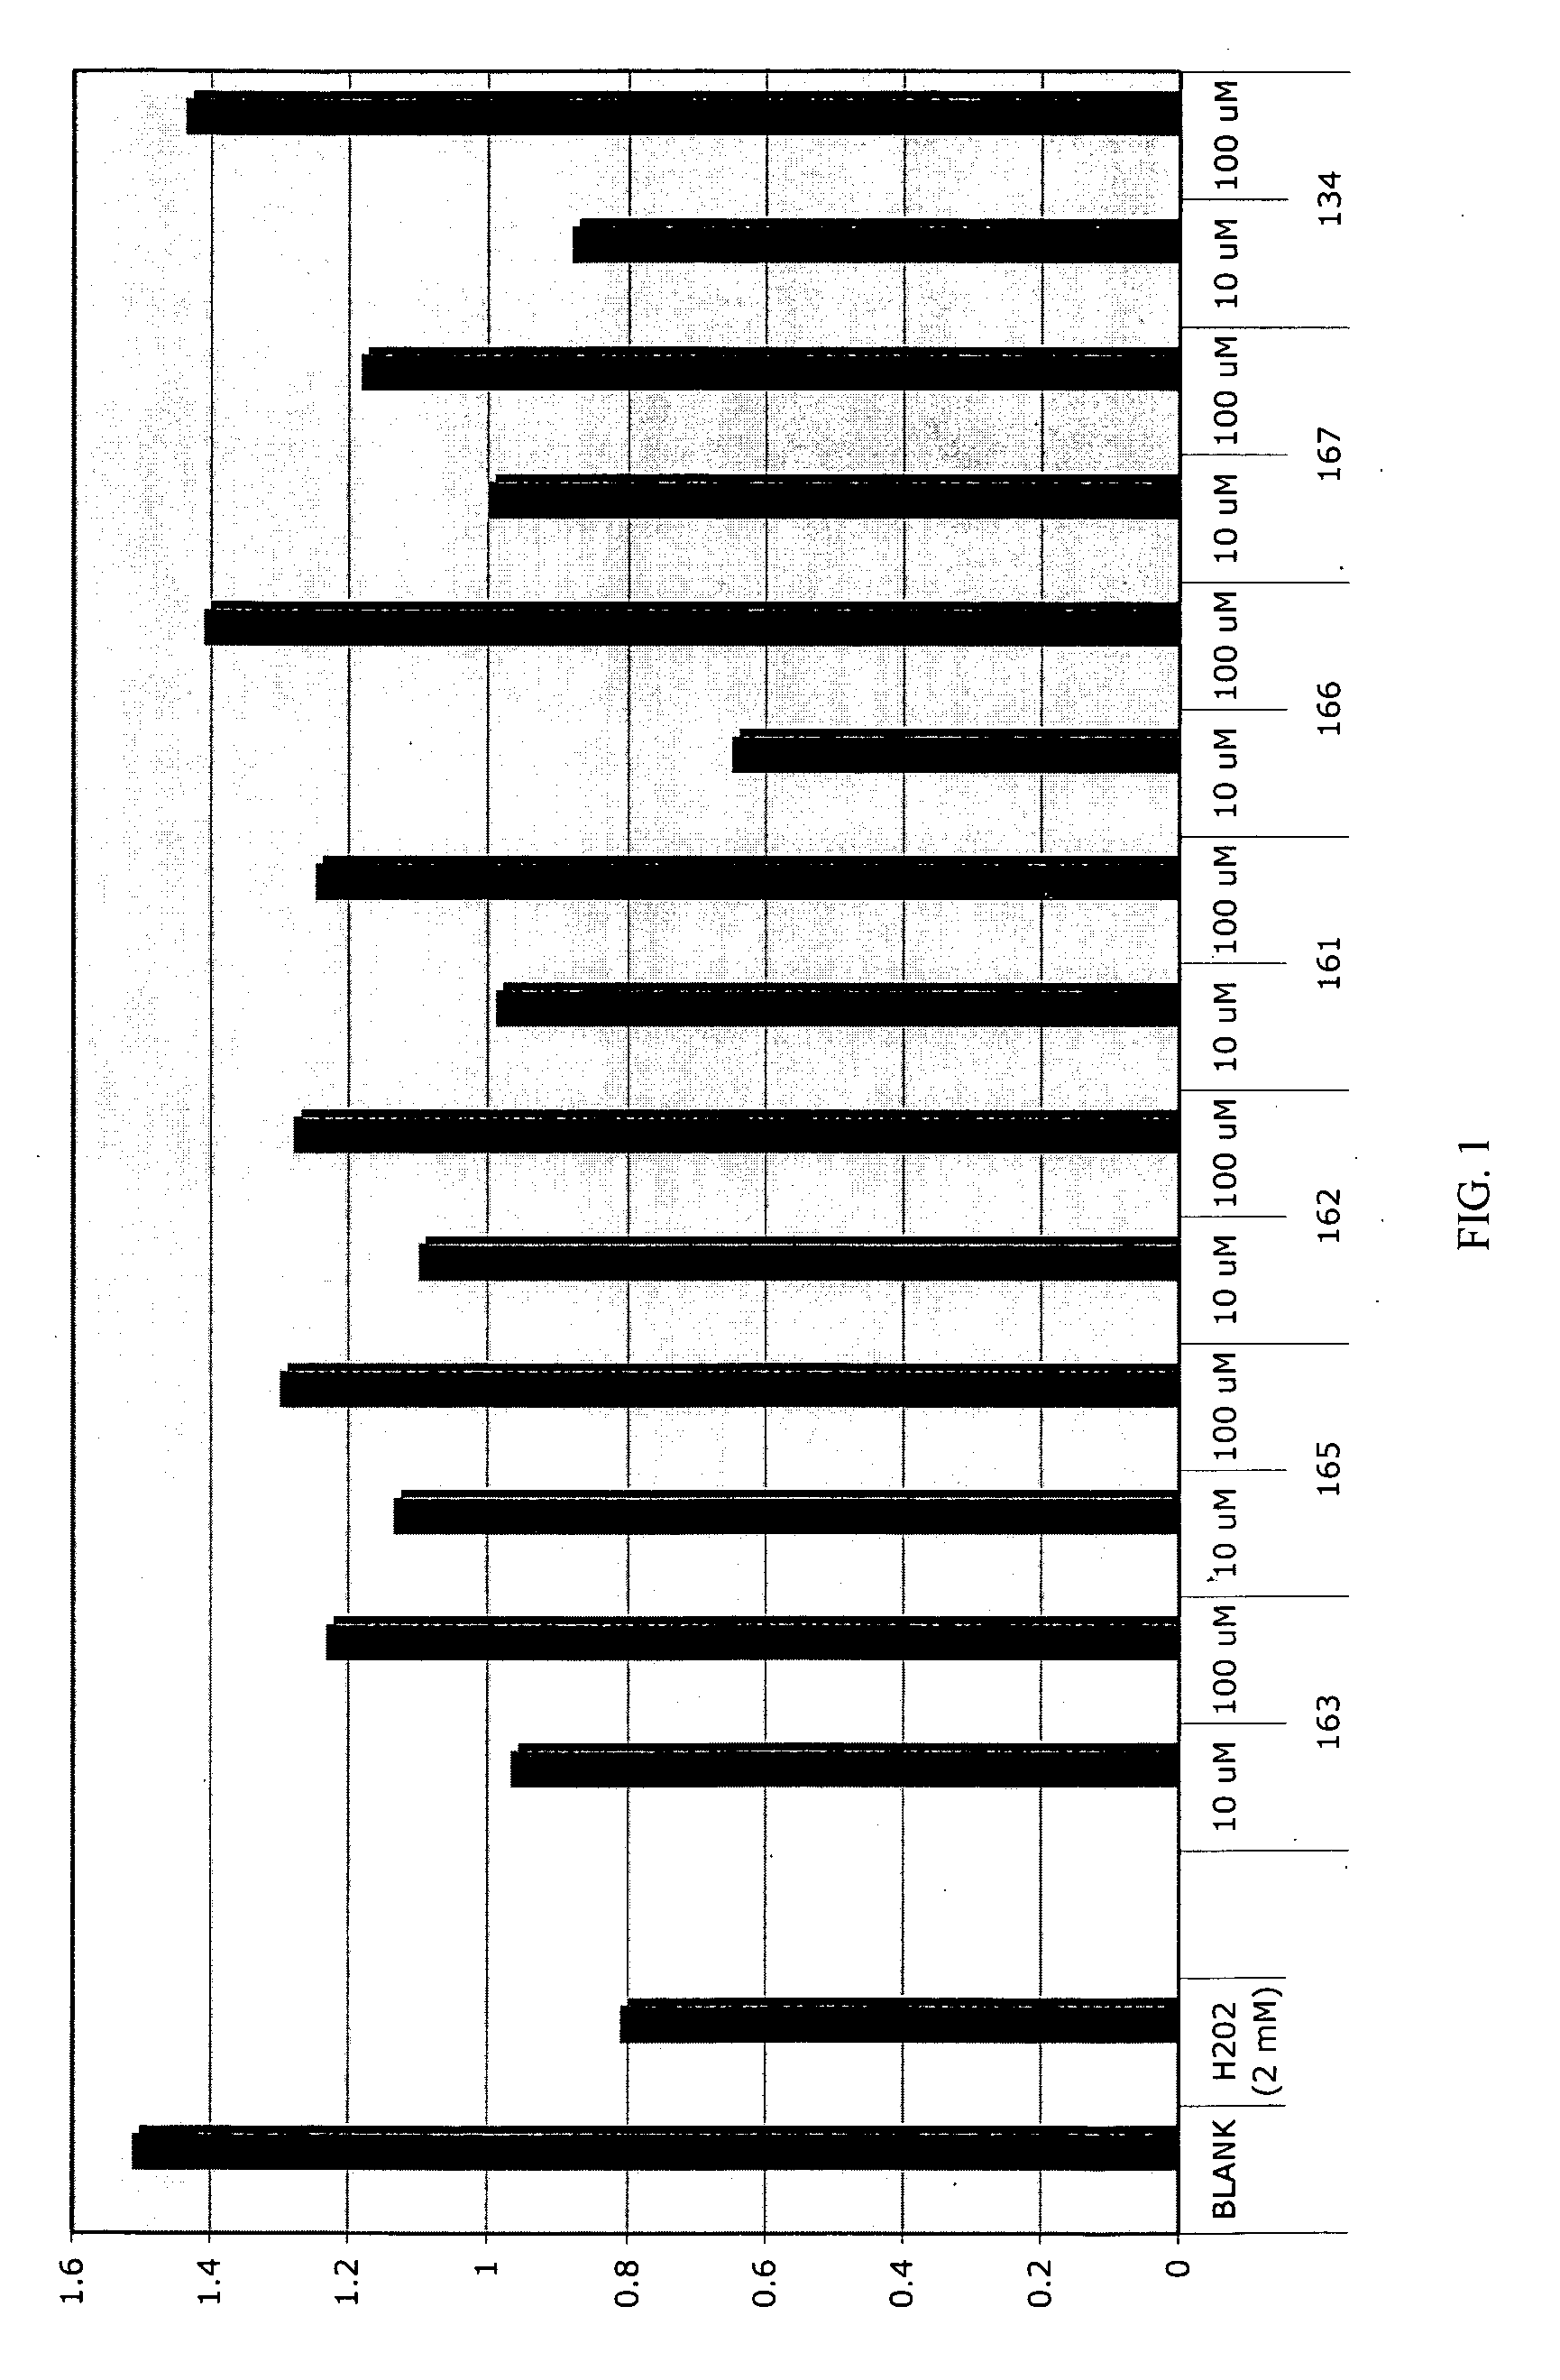 N-benzyl substituted pyridyl porphyrin compounds and methods of use thereof